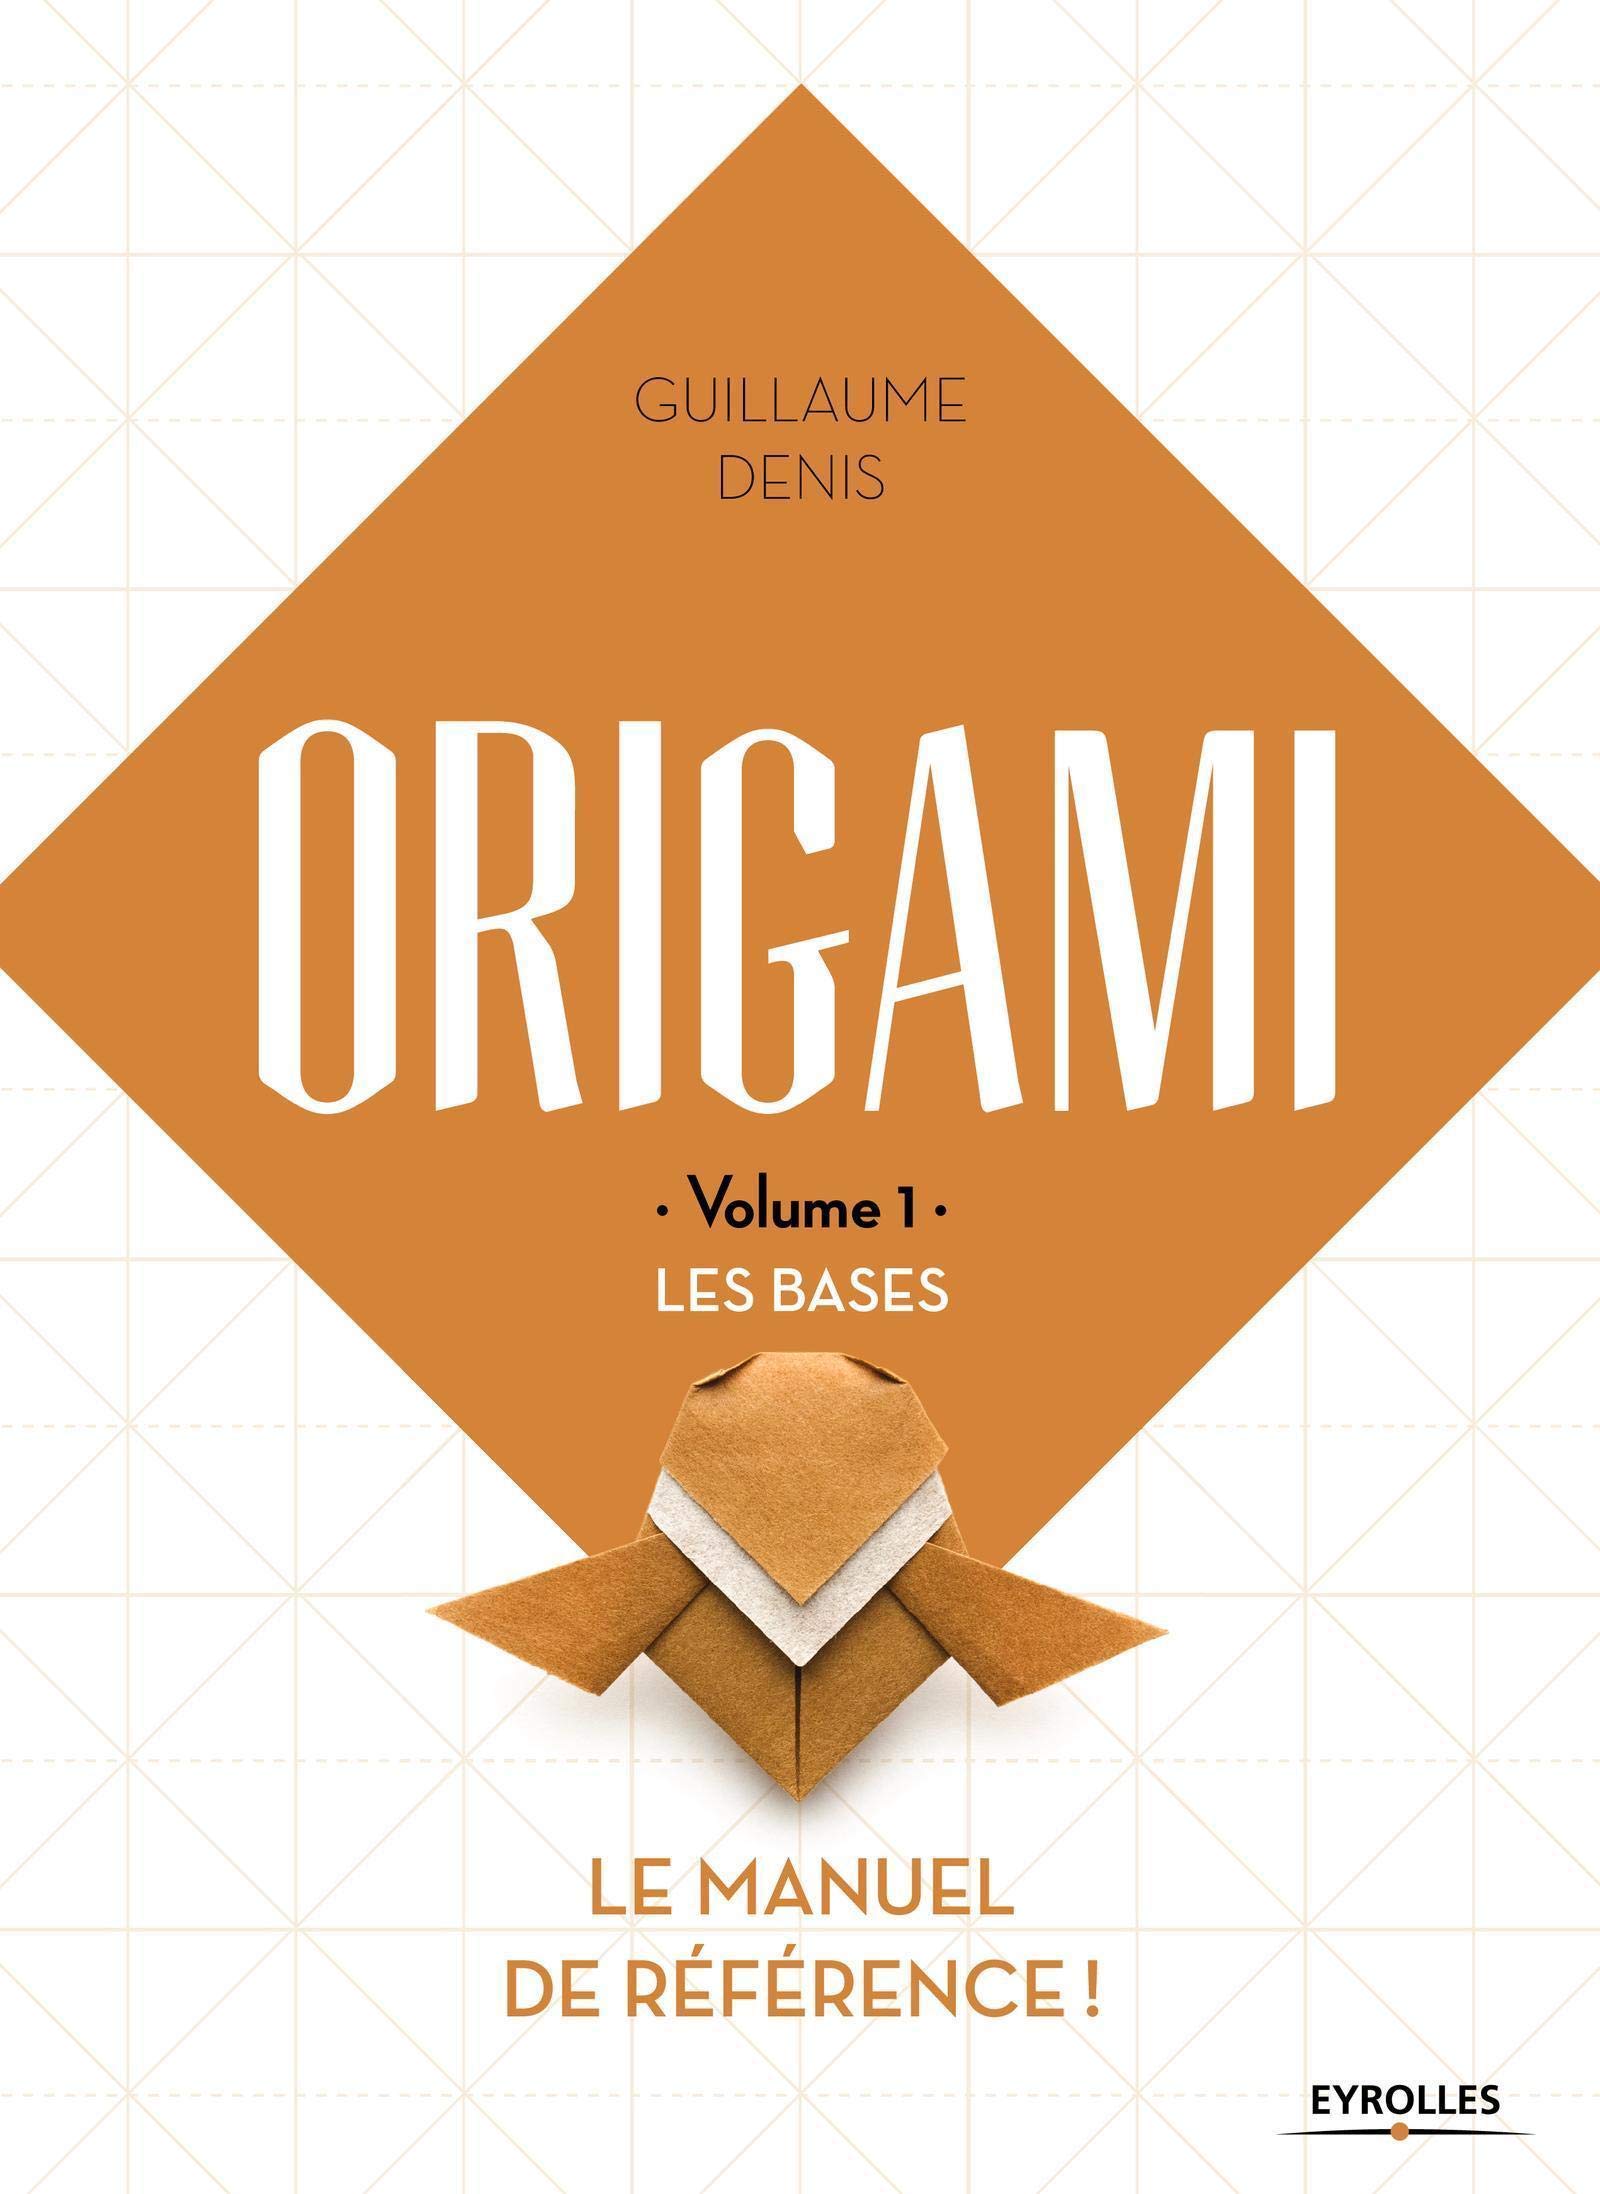 ORIGAMI - Volume 1 - LES BASES : page 55.